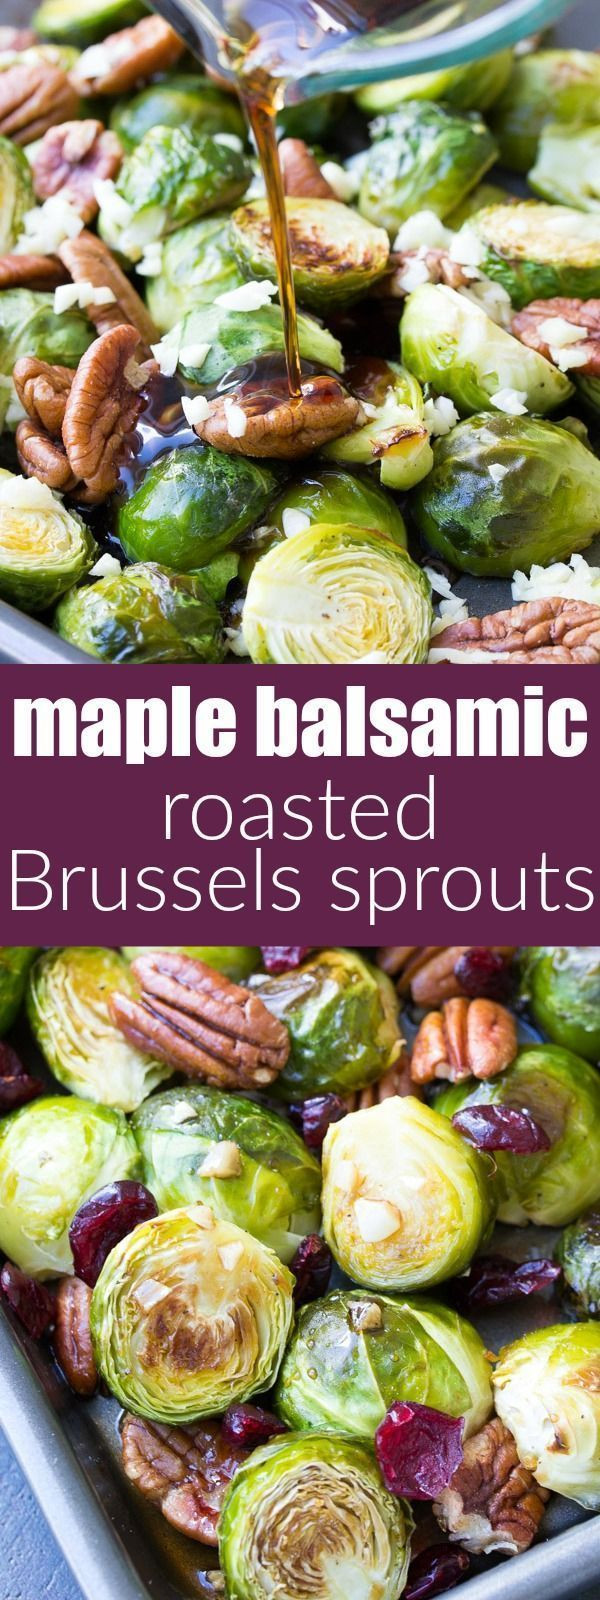 Brussels Sprouts Thanksgiving Side Dishes
 This Maple Balsamic Roasted Brussels Sprouts recipe is an